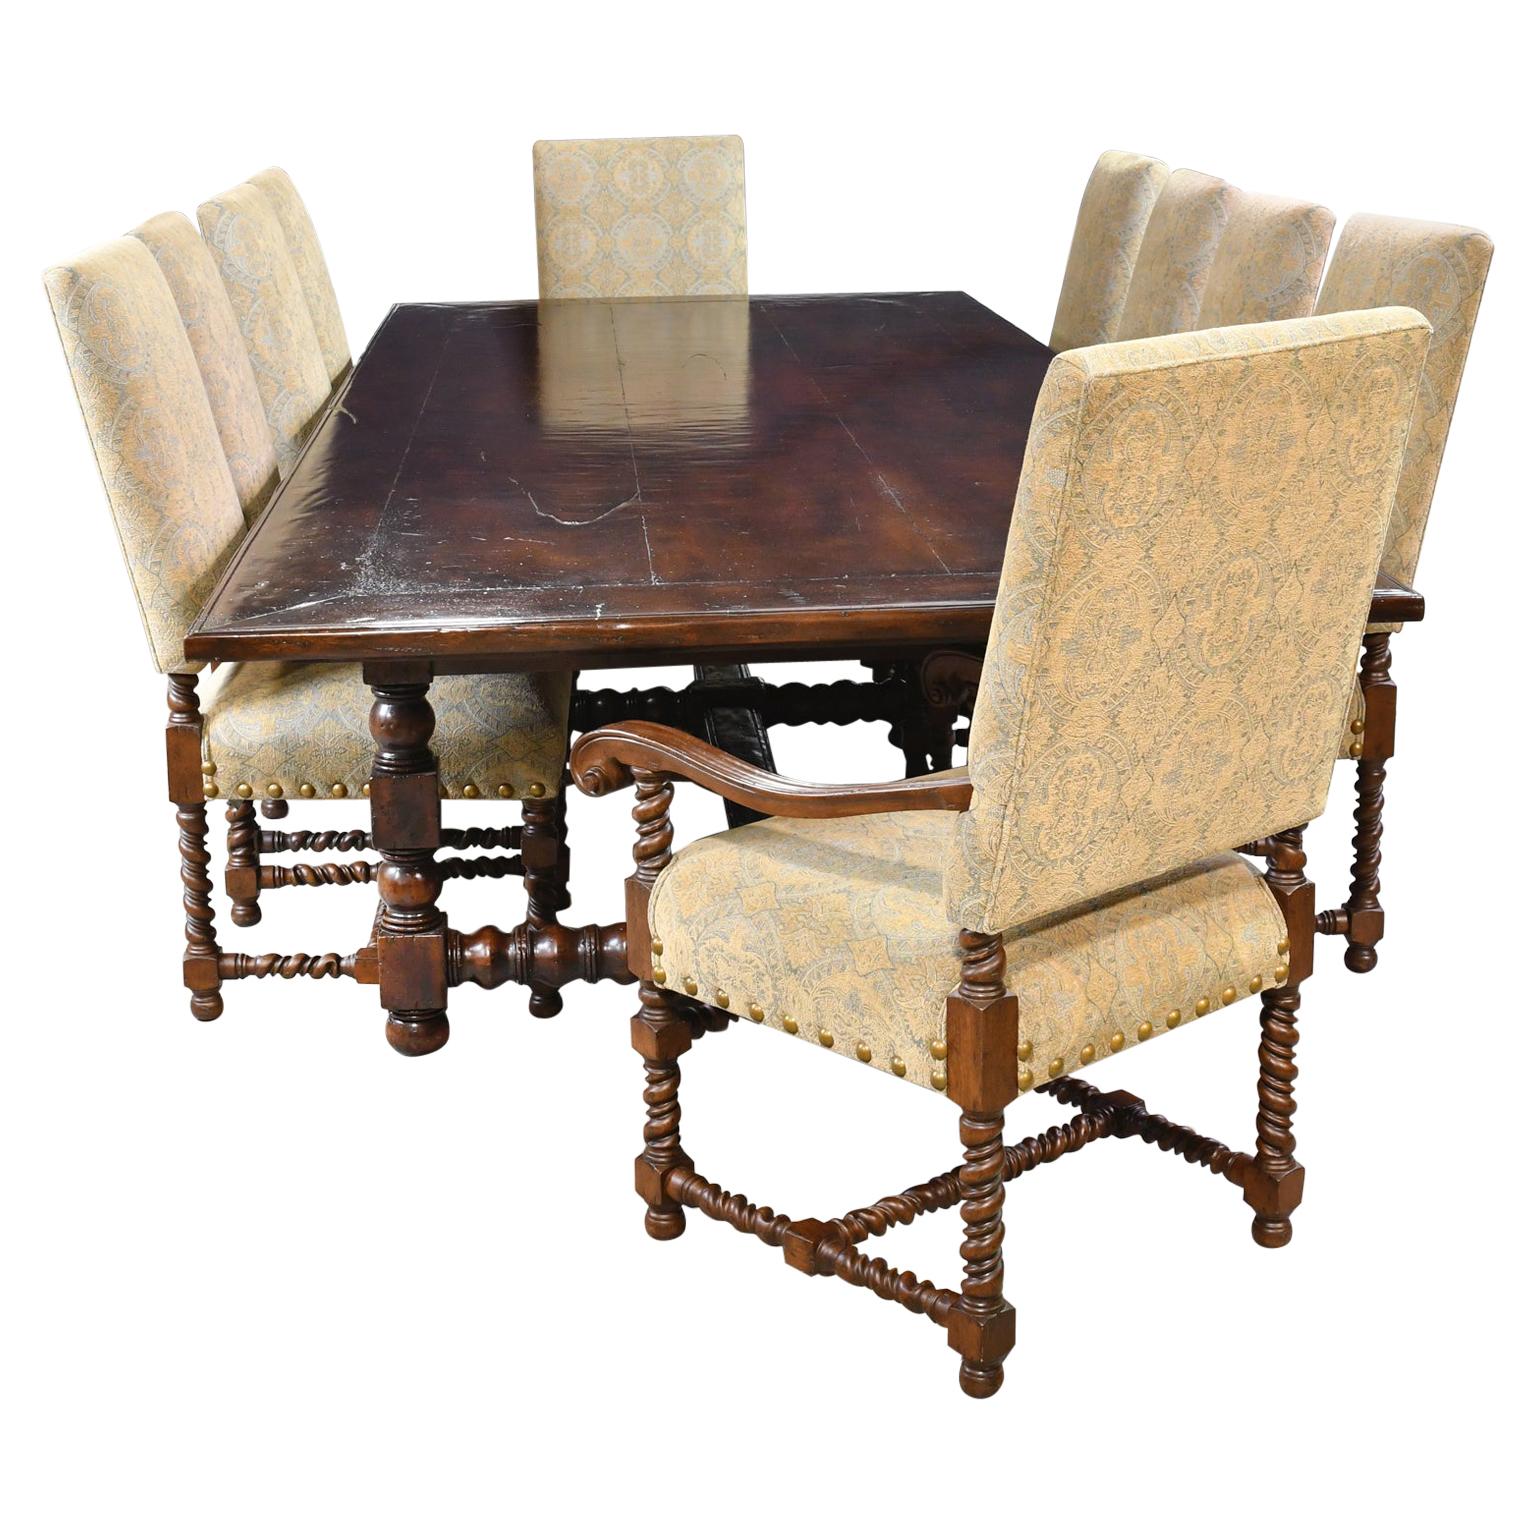 Dining Set with 12' Long Mahogany Table & 10 Upholstered Chairs with Turned Legs